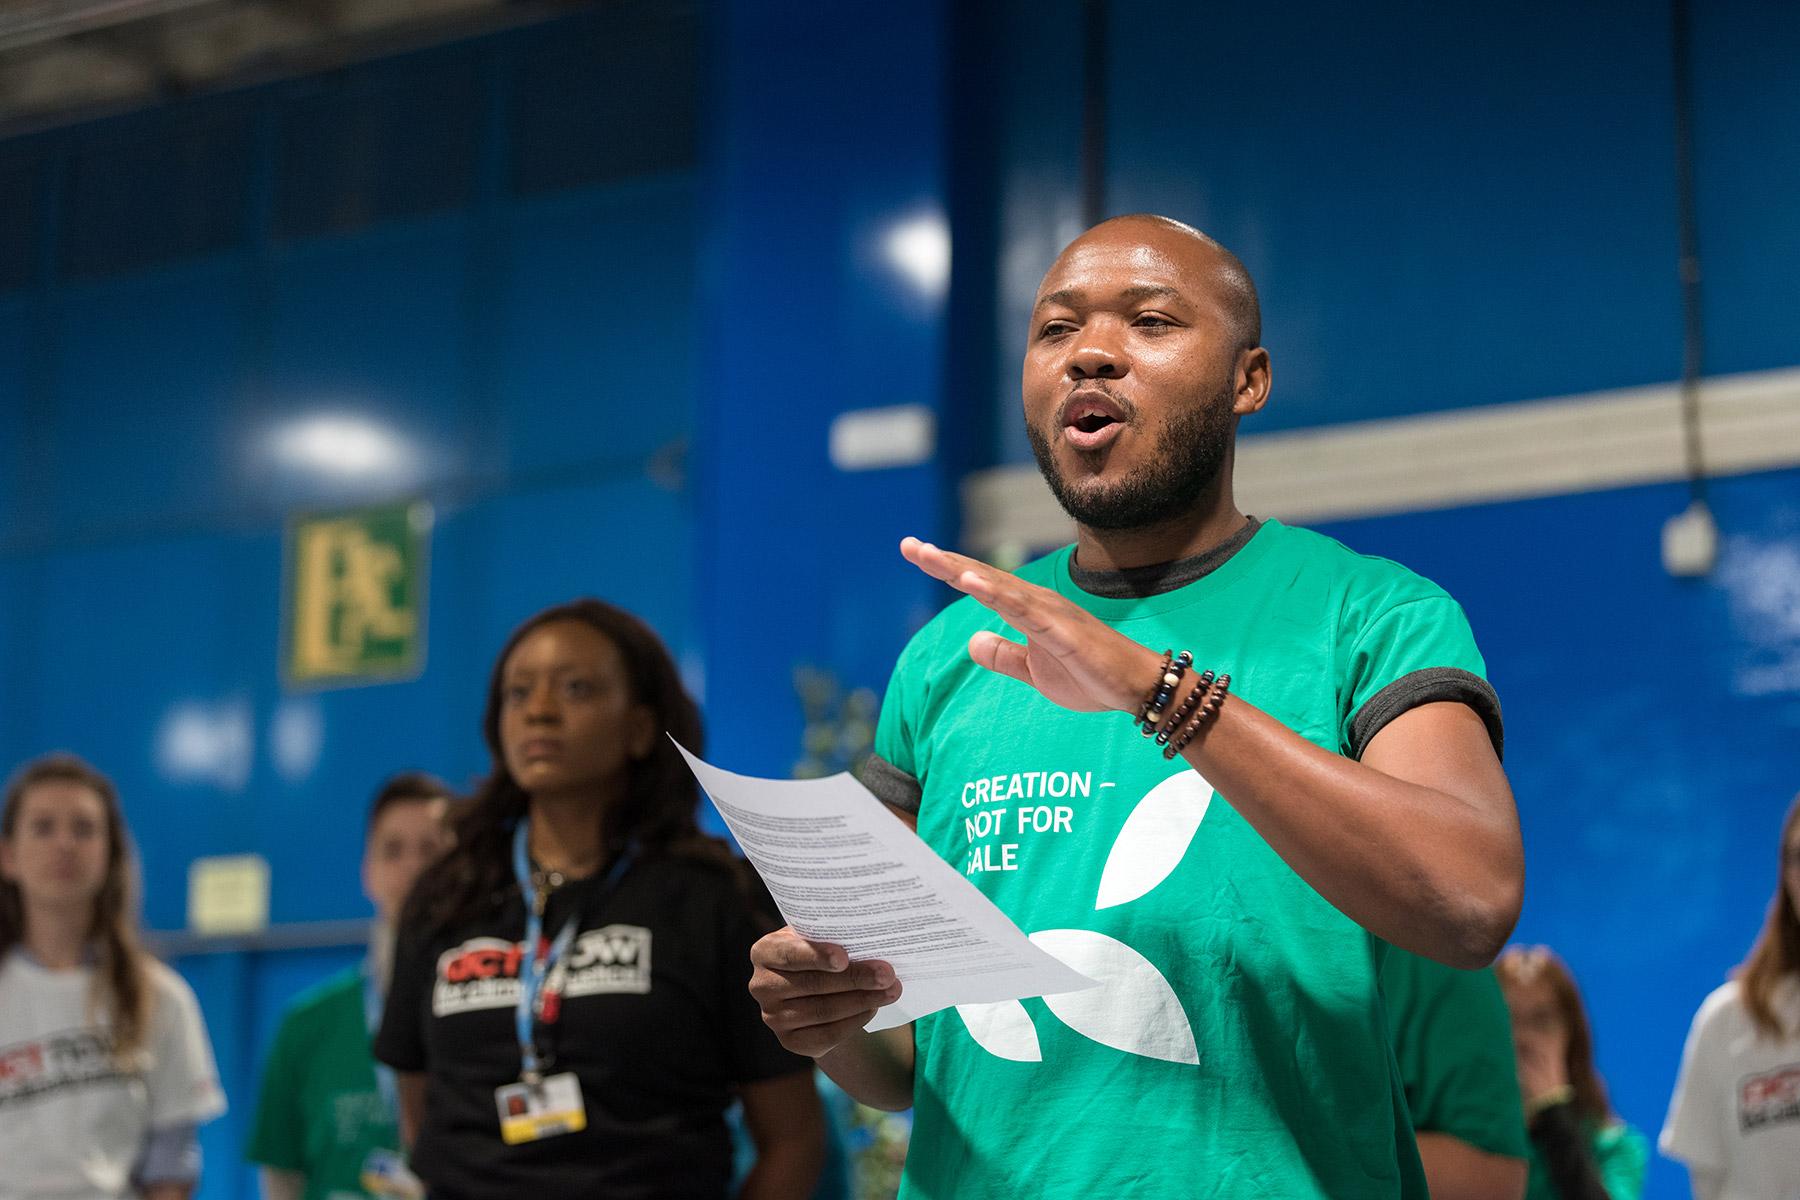 LWF Council member Khulekani Sizwe Magwaza advocating for climate justice during COP25 in Madrid, Spain, in 2019. Photo: LWF/Albin Hillert